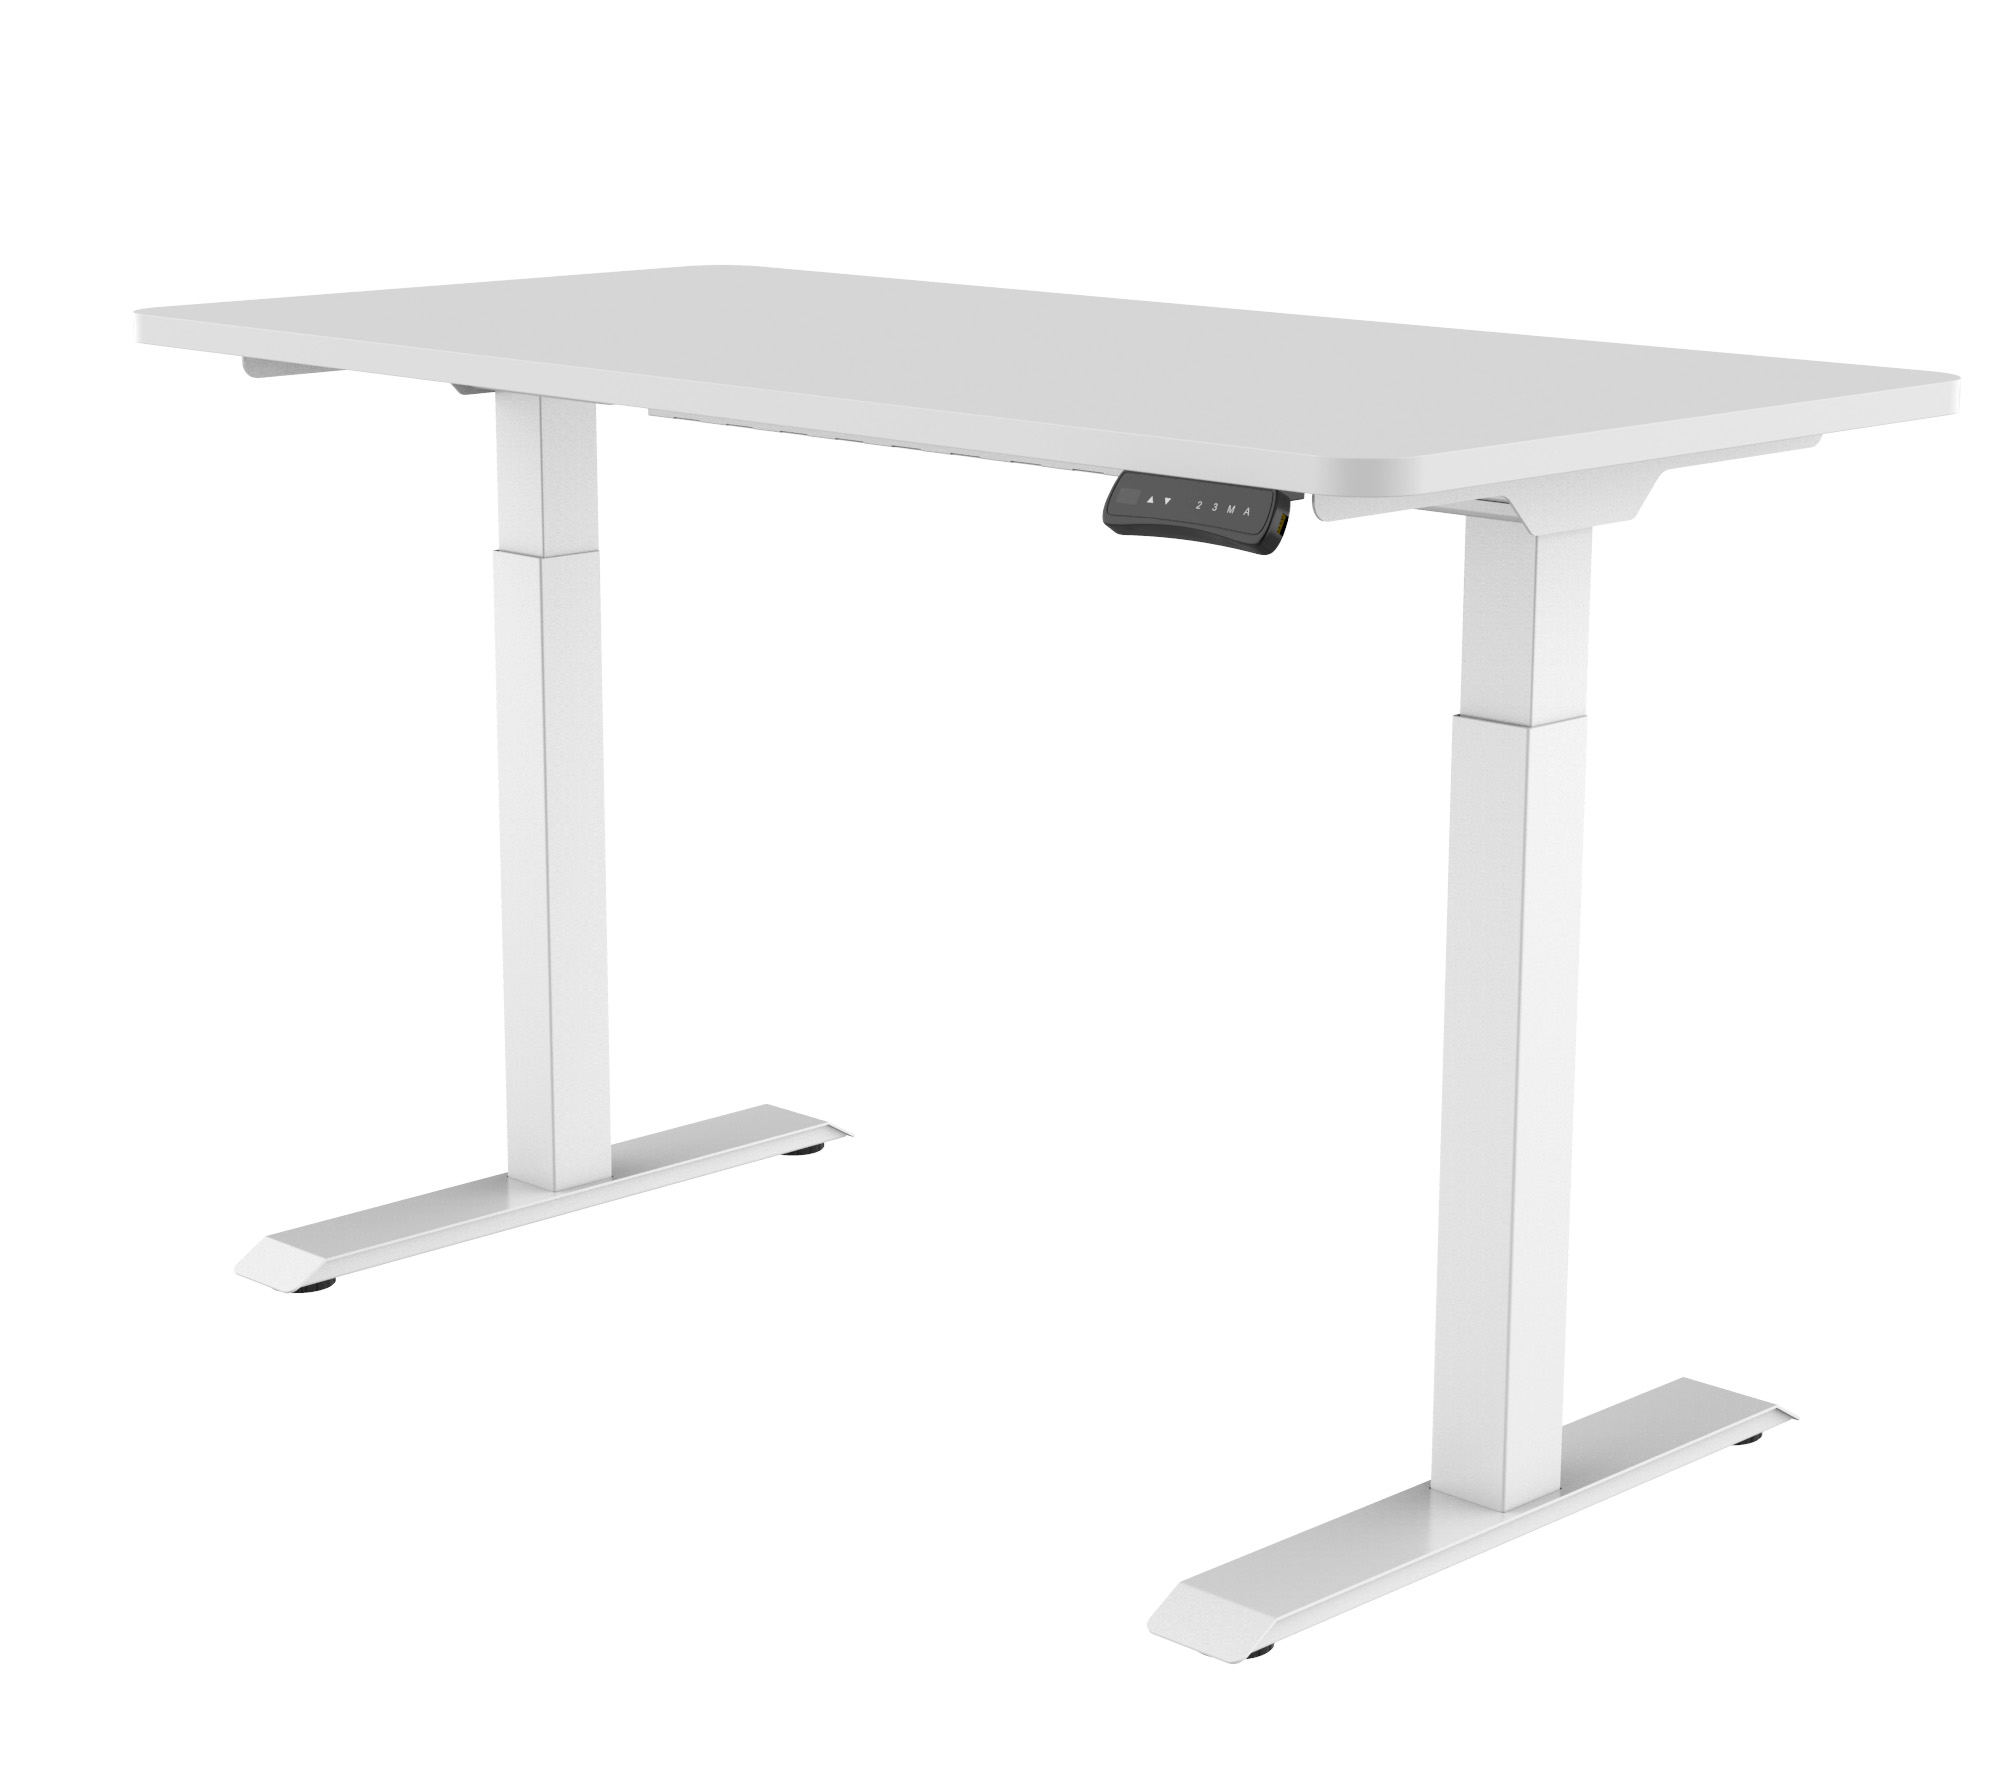 Motorized frame for height-adjustable desk with dual drive